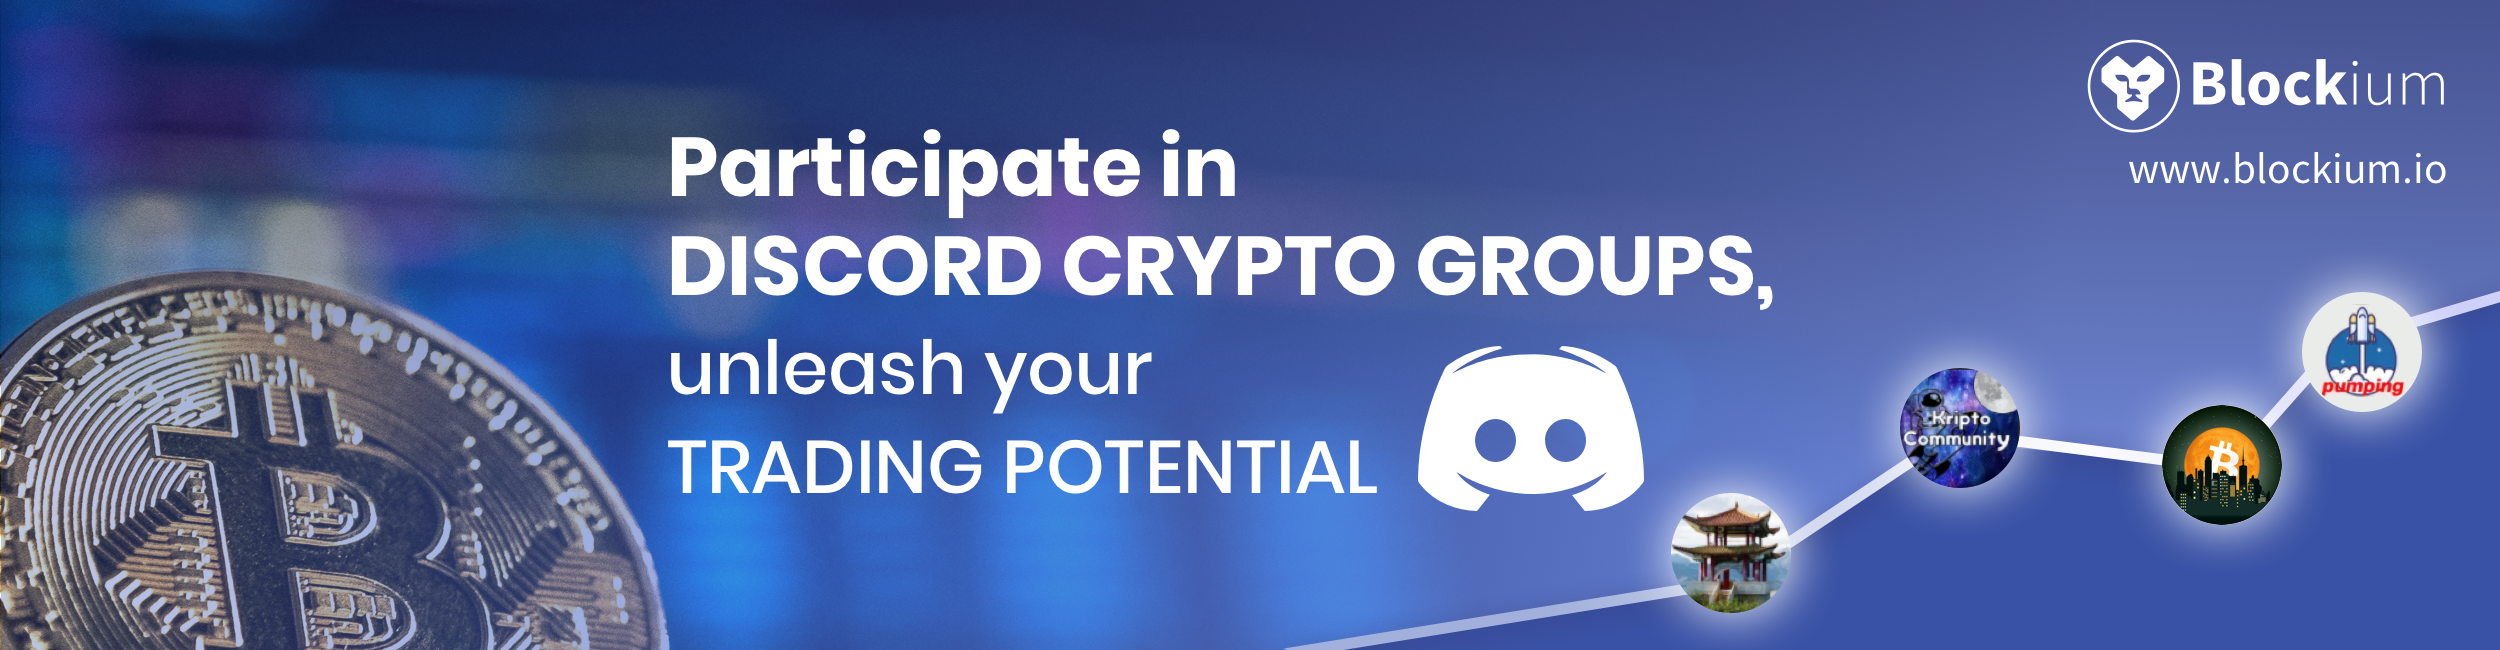 Participate In Discord Crypto Groups Unleash Your Trading Potential - 